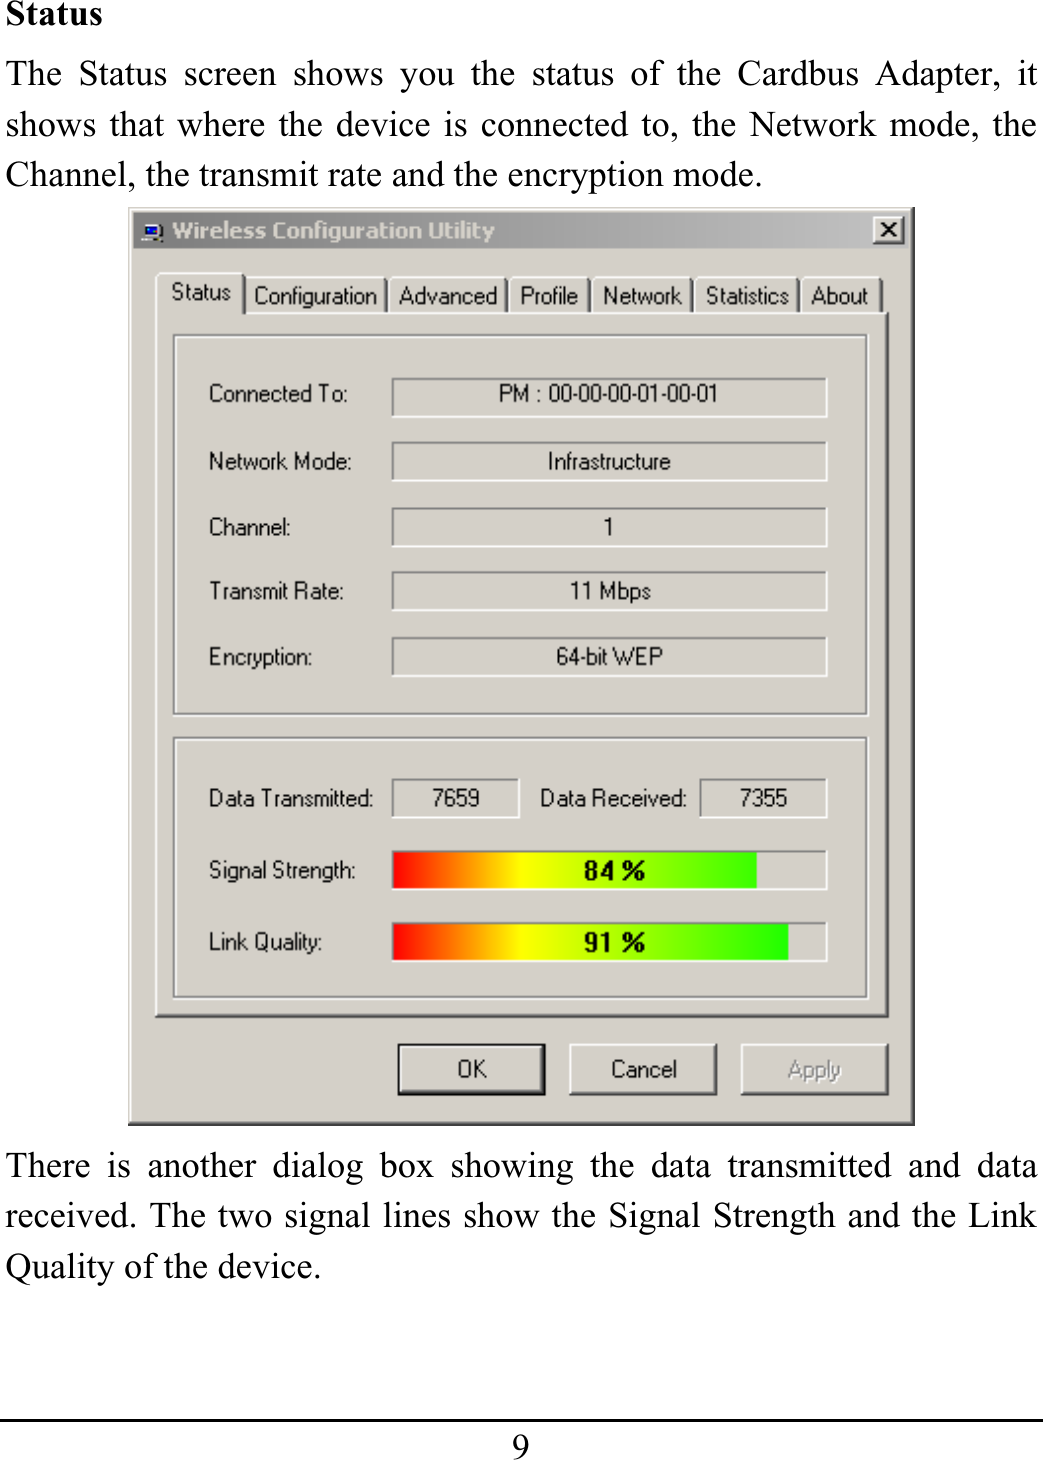 9StatusThe Status screen shows you the status of the Cardbus Adapter, it shows that where the device is connected to, the Network mode, the Channel, the transmit rate and the encryption mode. There is another dialog box showing the data transmitted and data received. The two signal lines show the Signal Strength and the Link Quality of the device. 